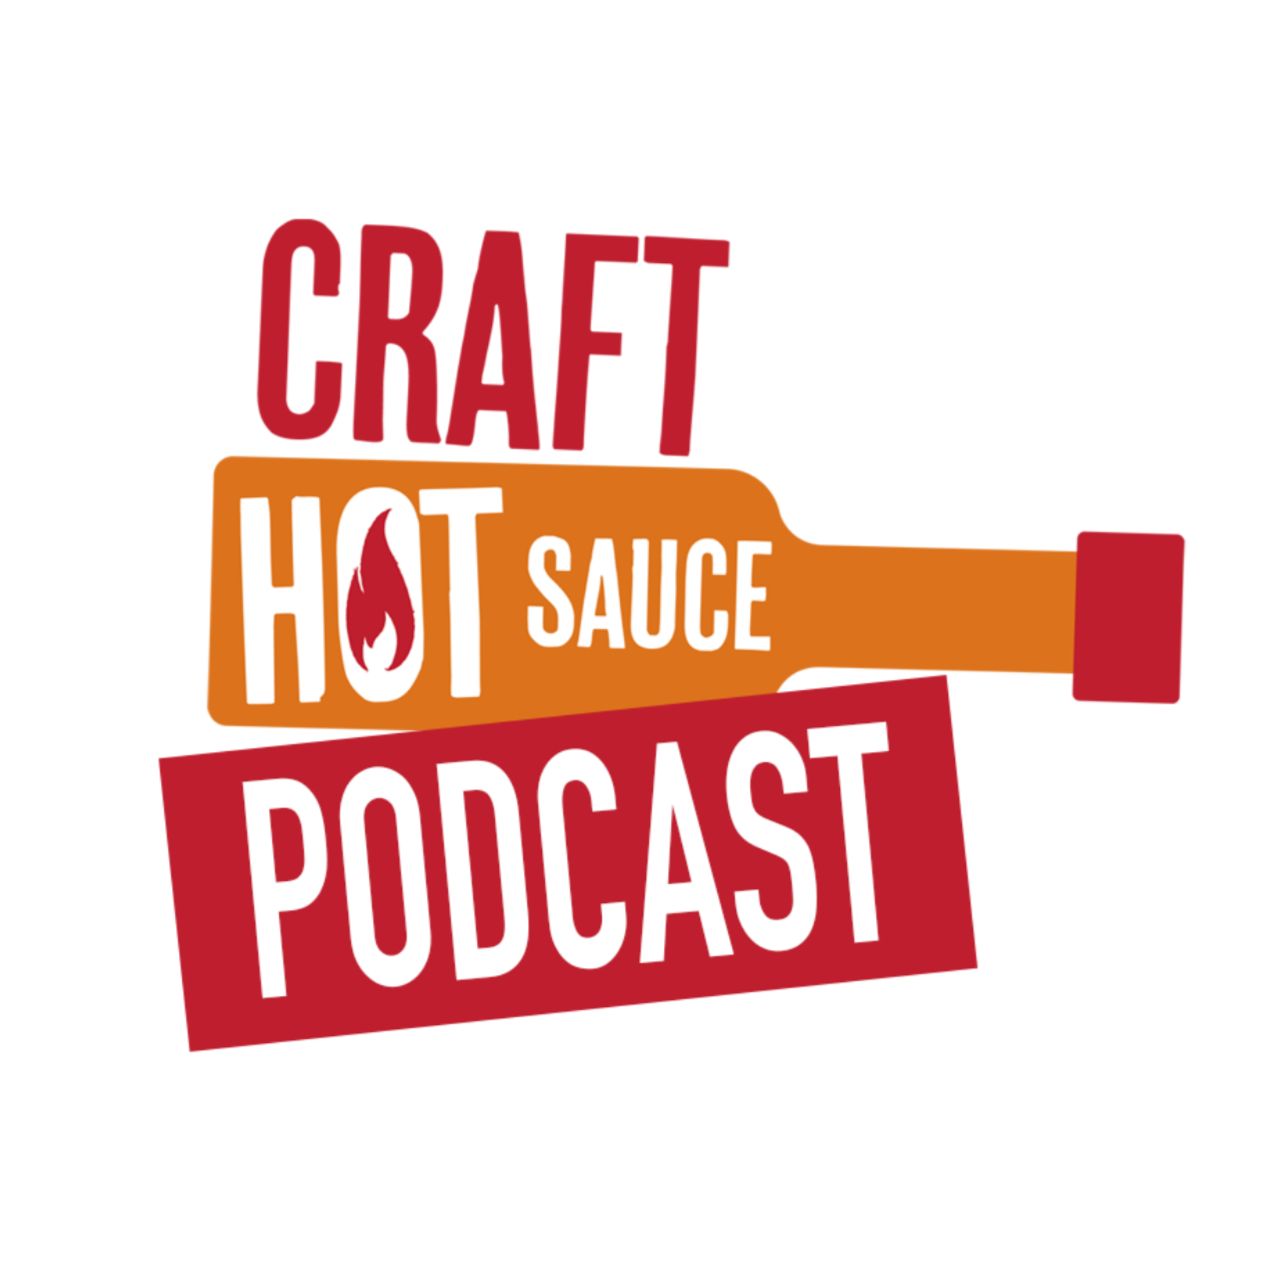 Bruce from Hoots Sauce on Scottish fire roasted fermented hot sauce